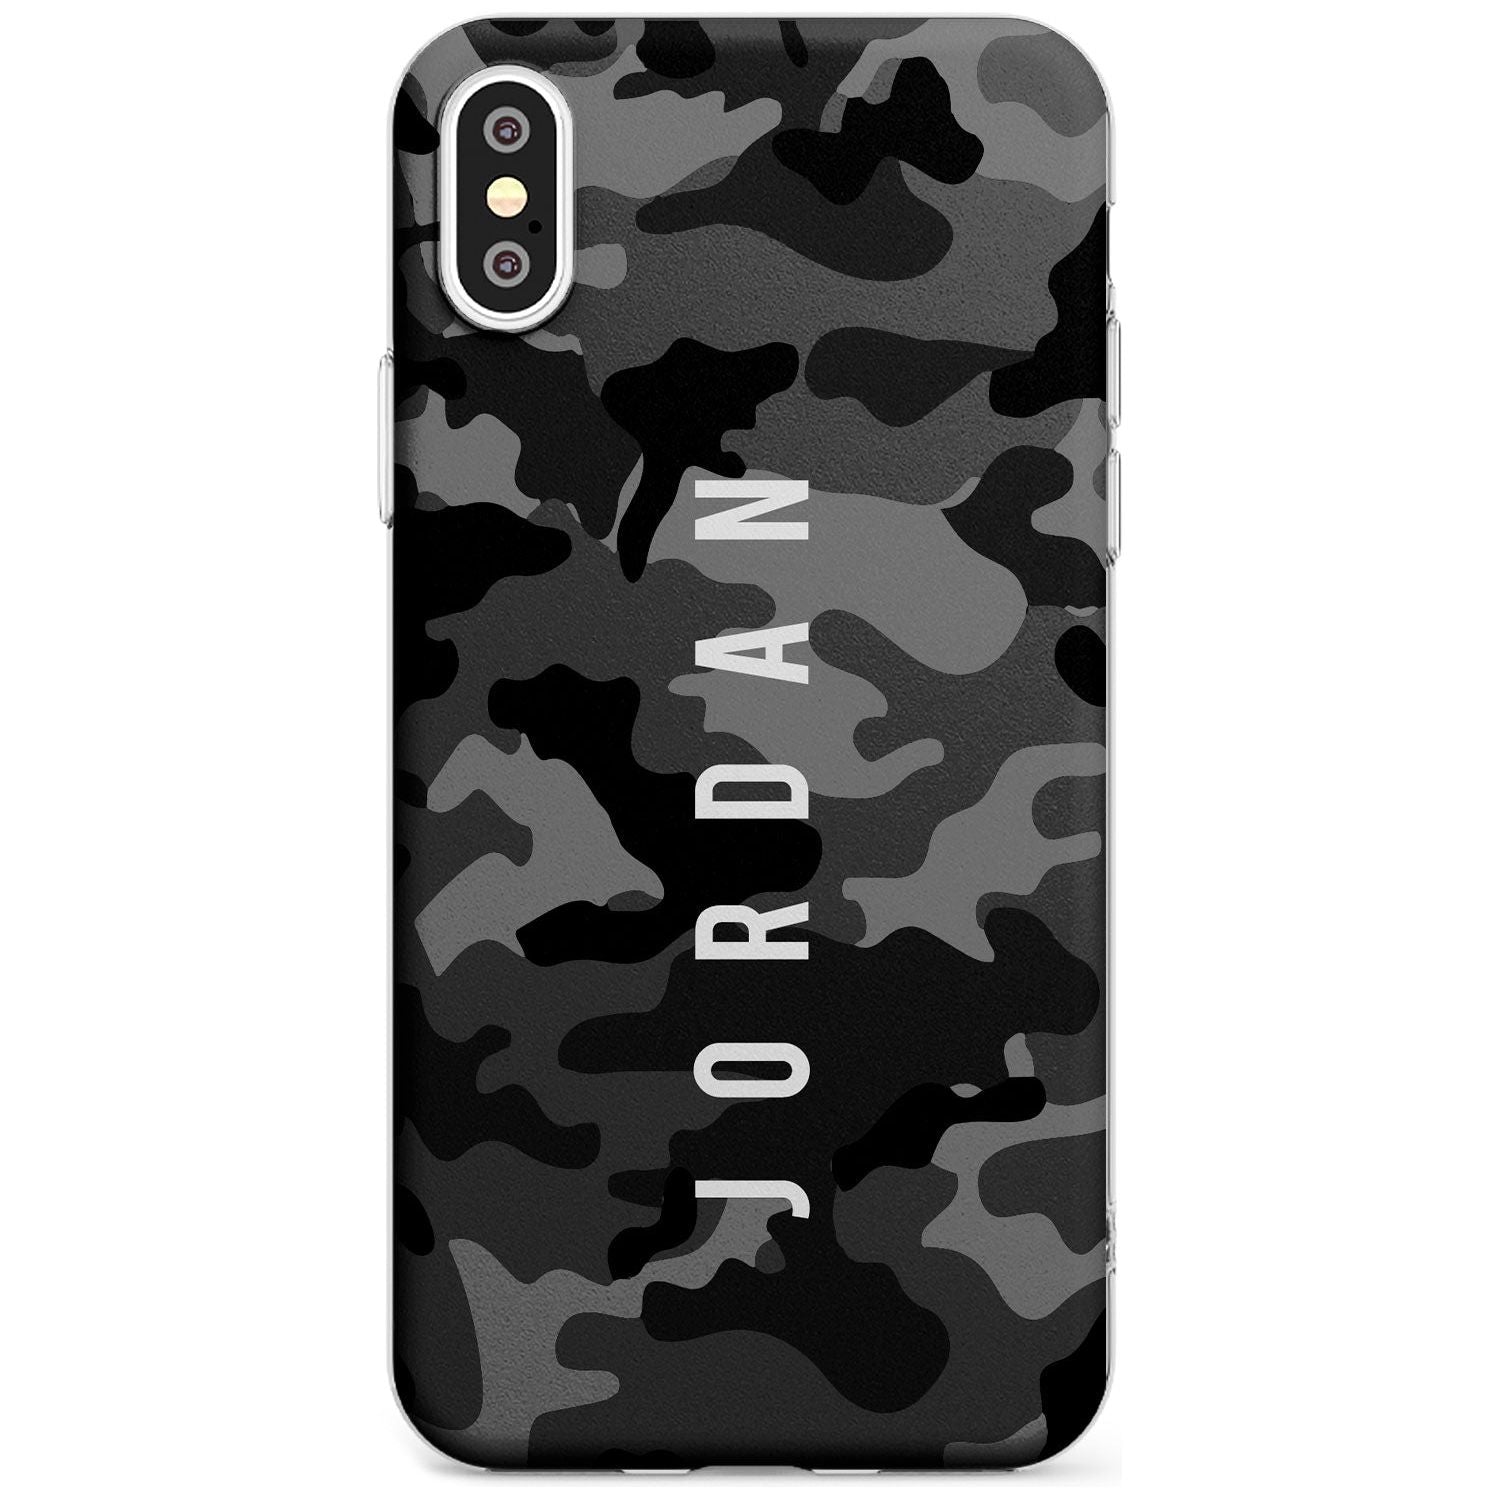 Small Vertical Name Personalised Black Camouflage Slim TPU Phone Case Warehouse X XS Max XR